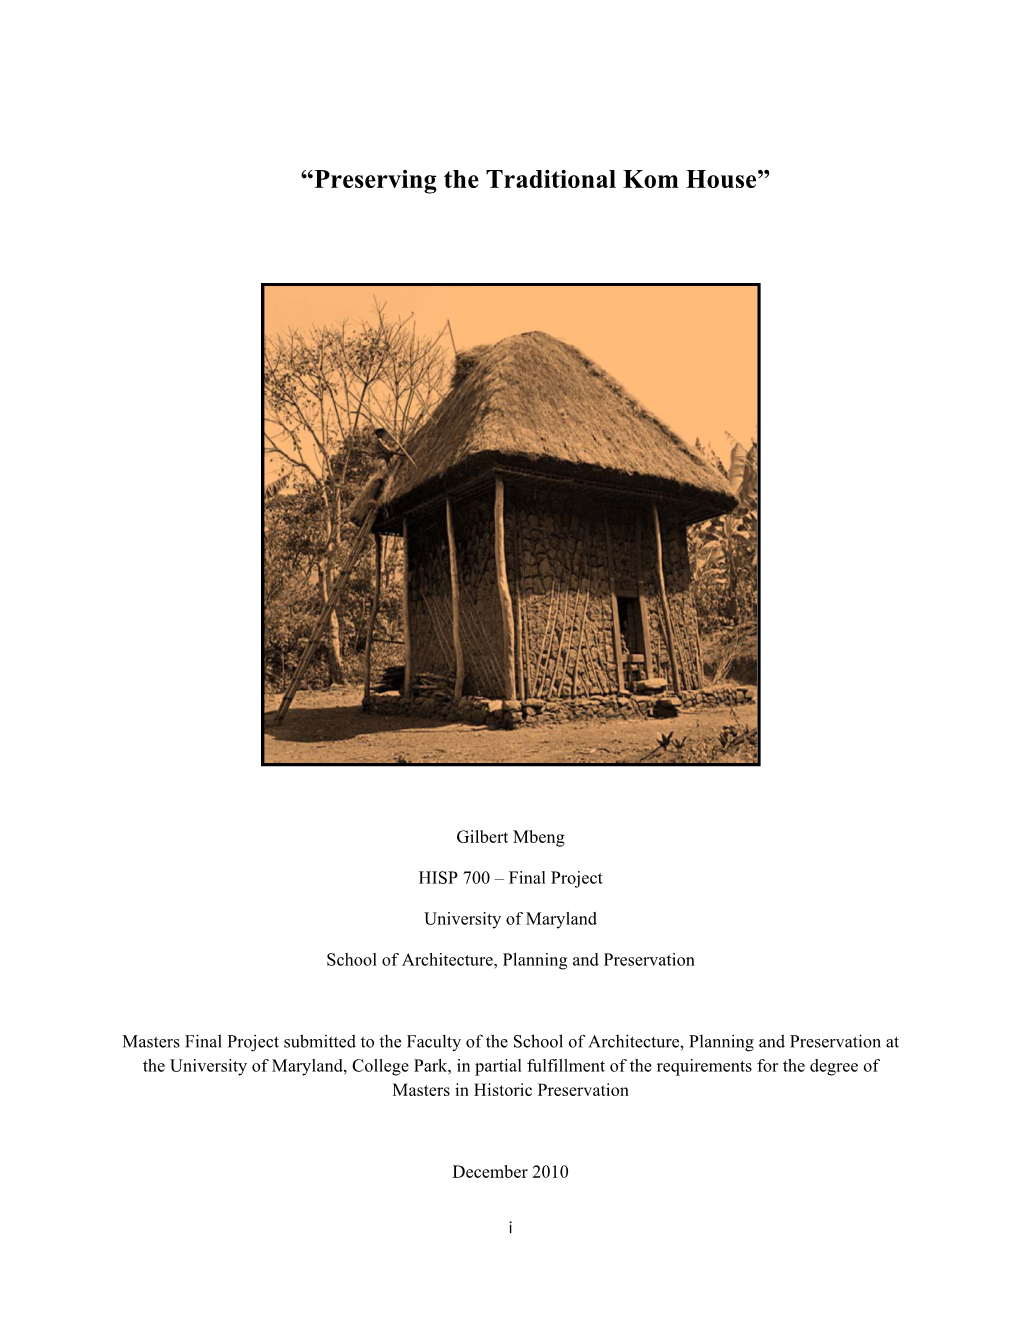 “Preserving the Traditional Kom House”